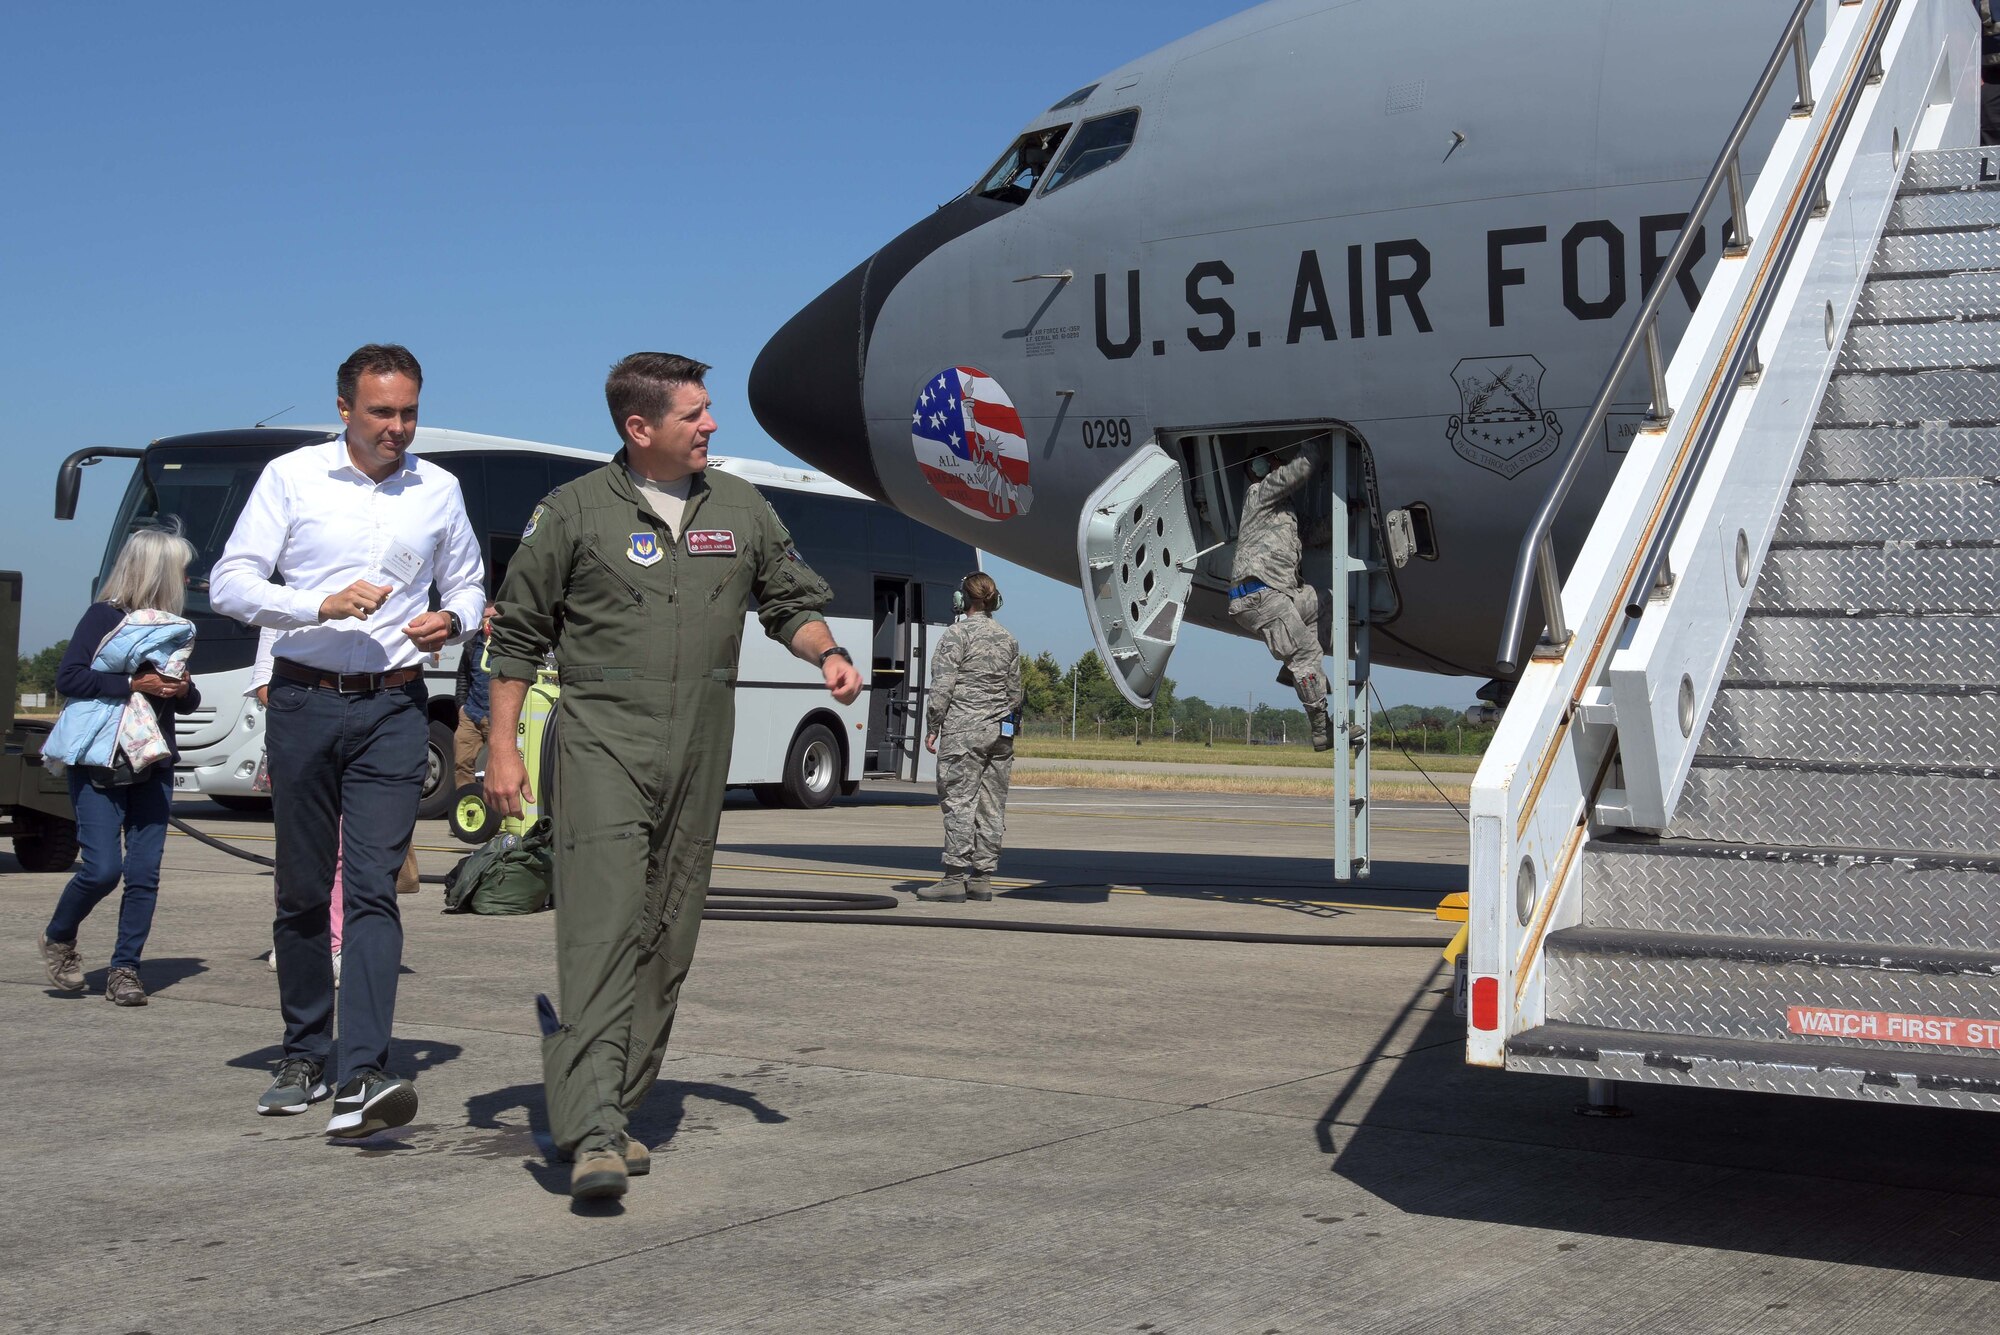 U.S. Air Force Col. Christopher Amrhein, 100th Air Refueling Wing commander, leads a group of honorary commanders onto a U.S. Air Force KC-135 Stratotanker during Honorary Commanders Day at RAF Mildenhall, England, June 26, 2018. Honorary Commanders Day is an event that provides an opportunity to foster relations between the base and the local community. (U.S. Air Force photo by Airman 1st Class Benjamin Cooper)